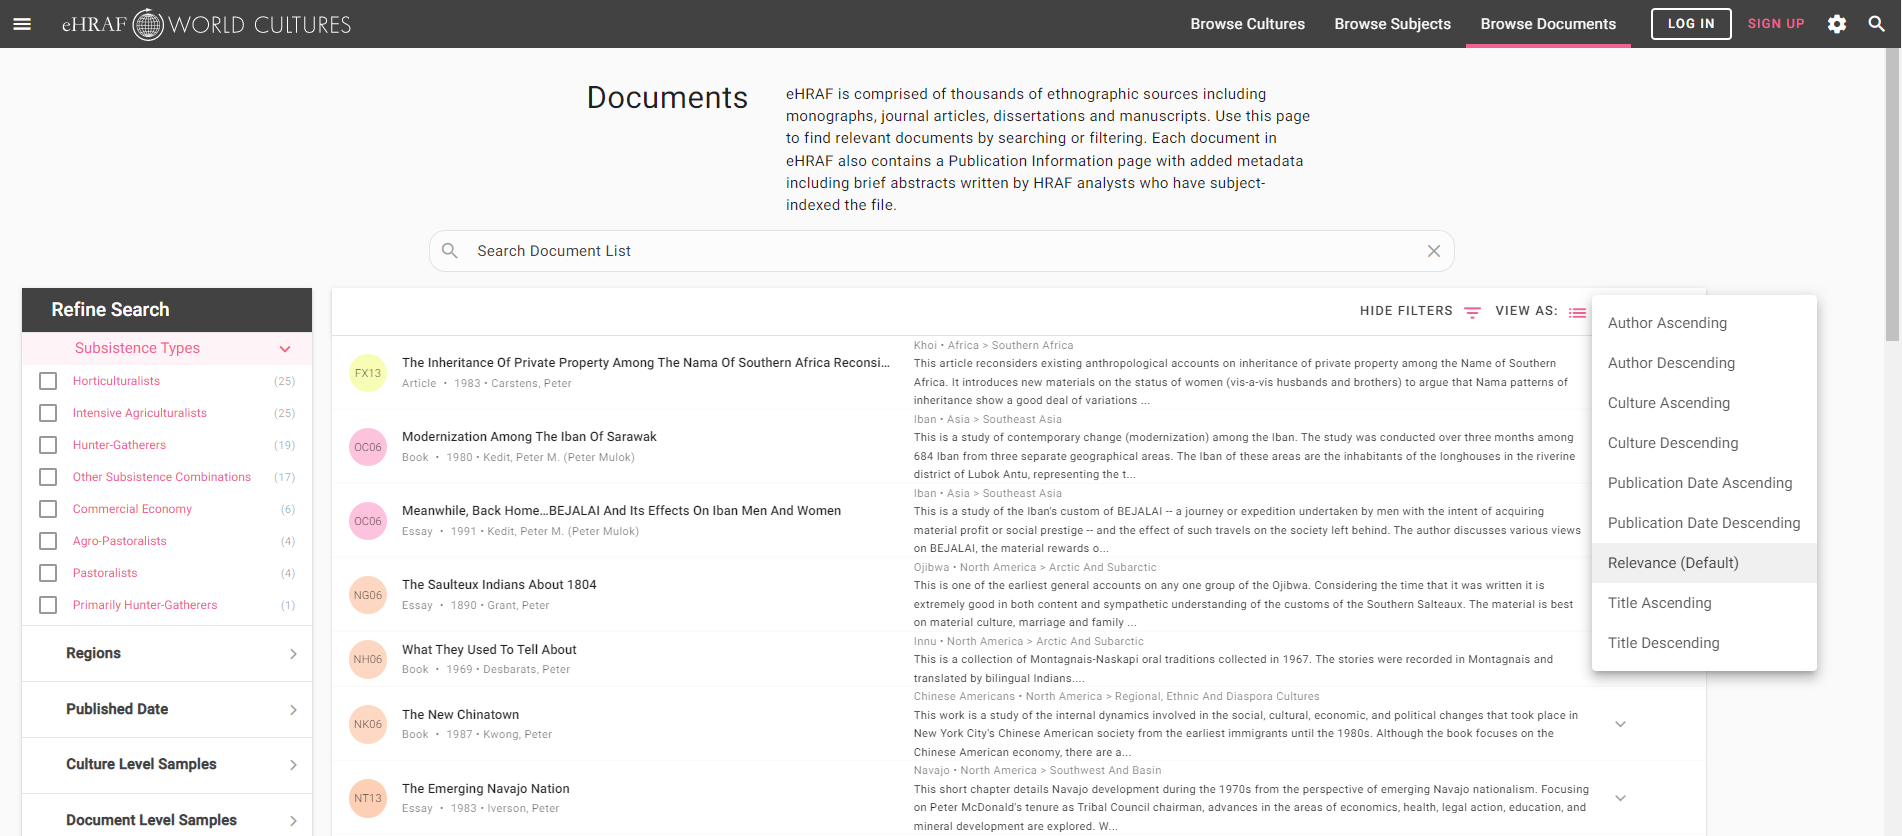 list of ehraf world cultures documents with search bar at the top and filters list on the side